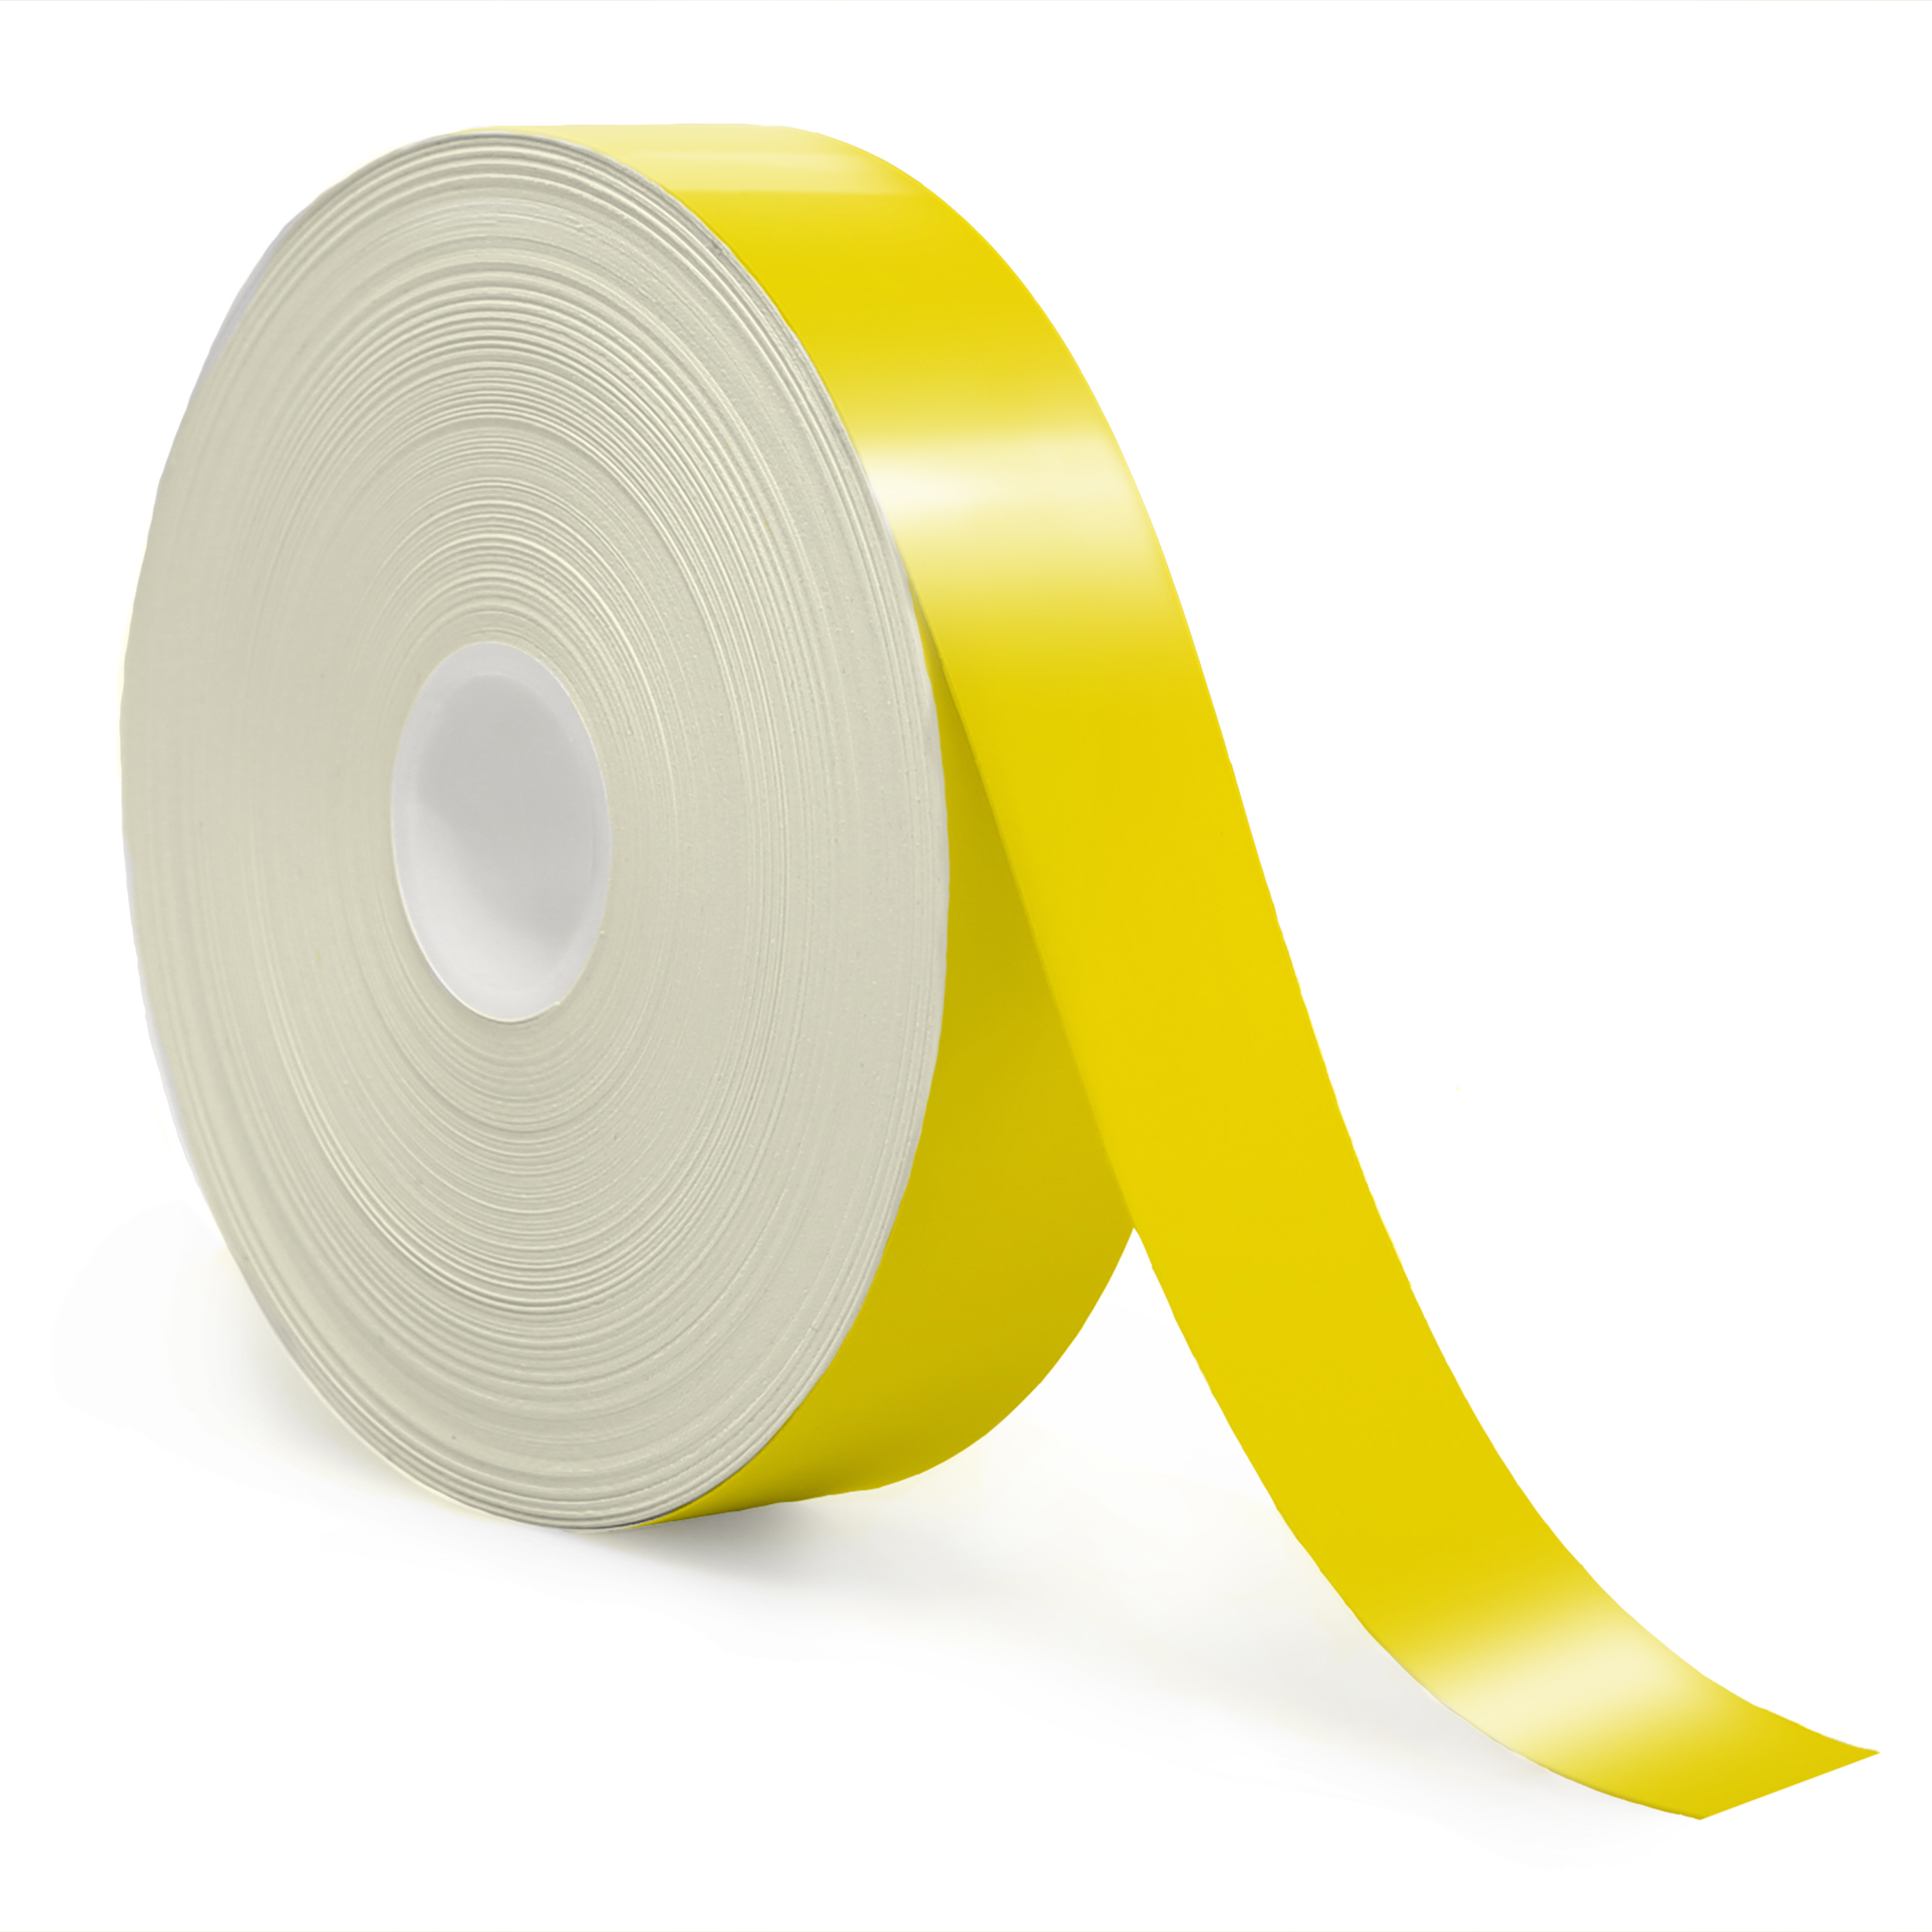 Detail view for 1" x 70ft Yellow Reflective Vinyl Tape